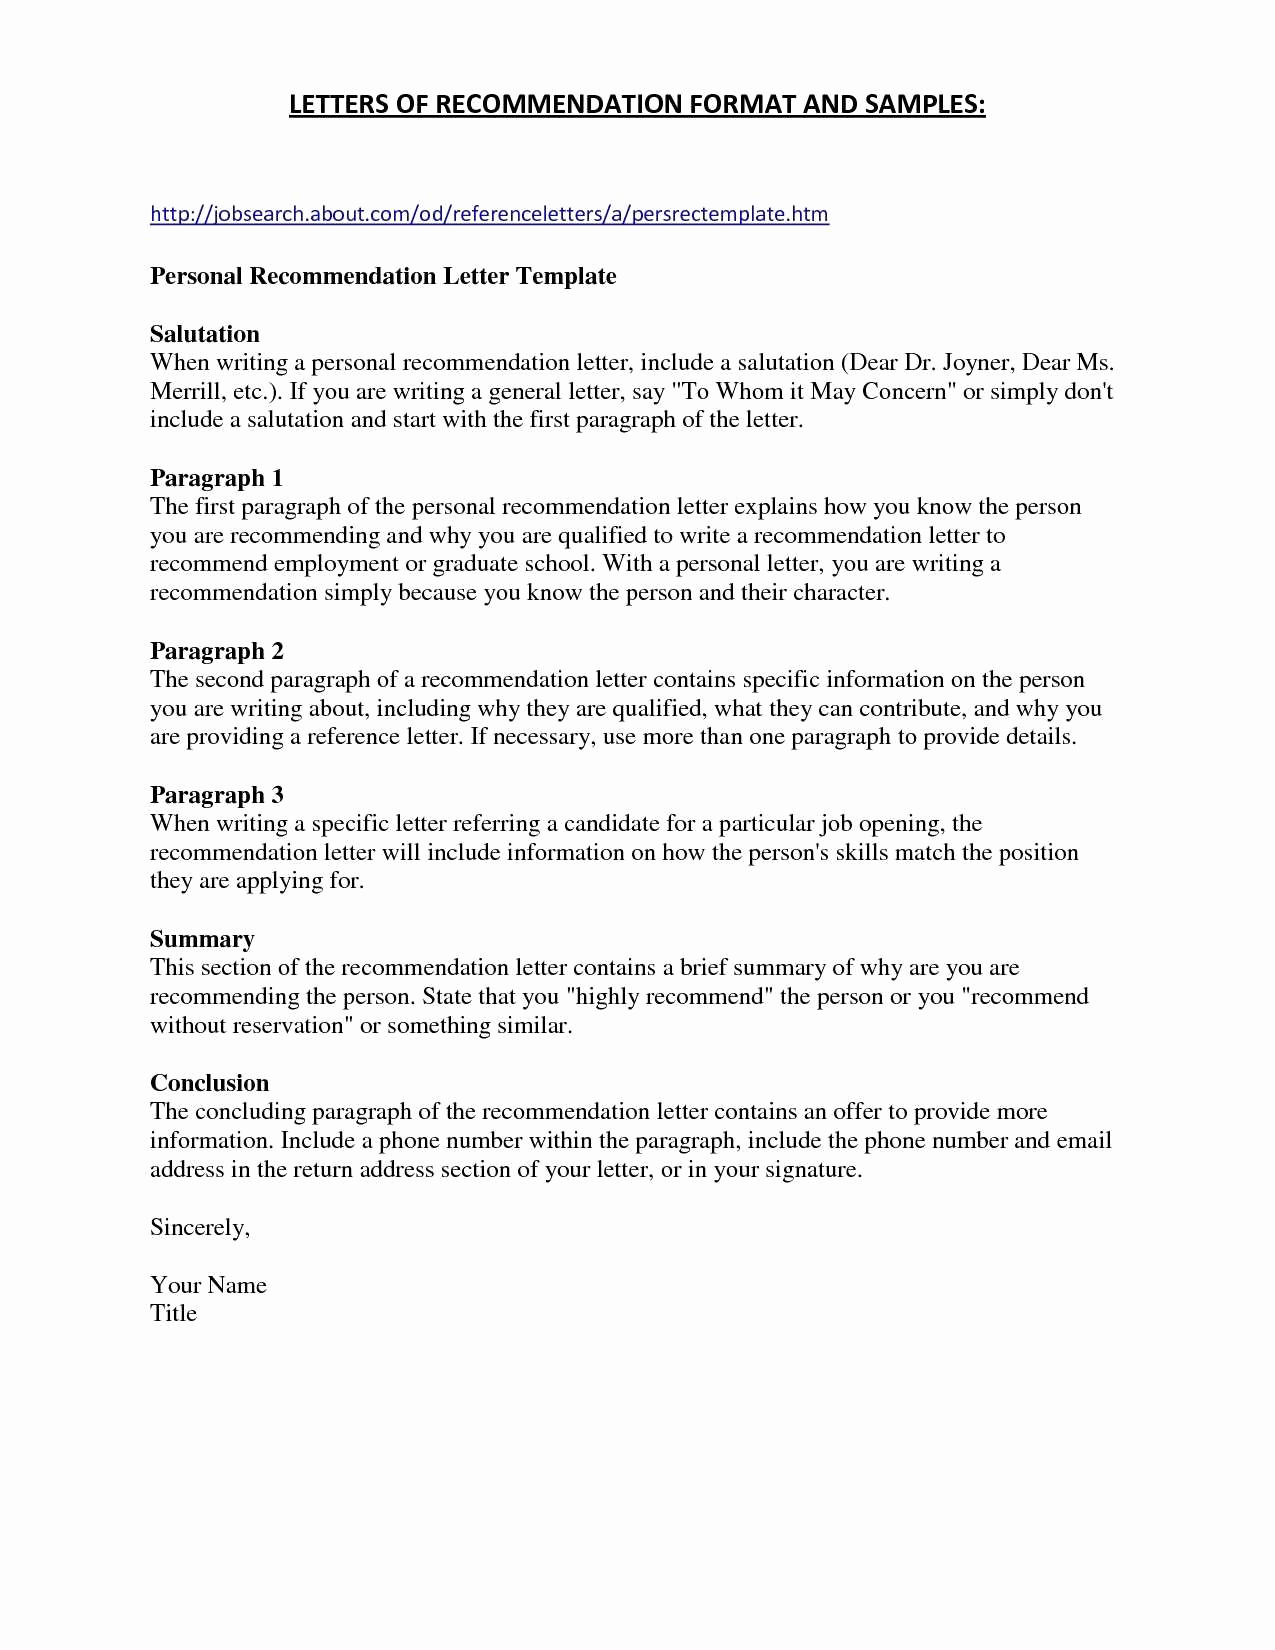 Template for Ending Lease Letter - Rental Agreements Templates Awesome Lease Termination Letter